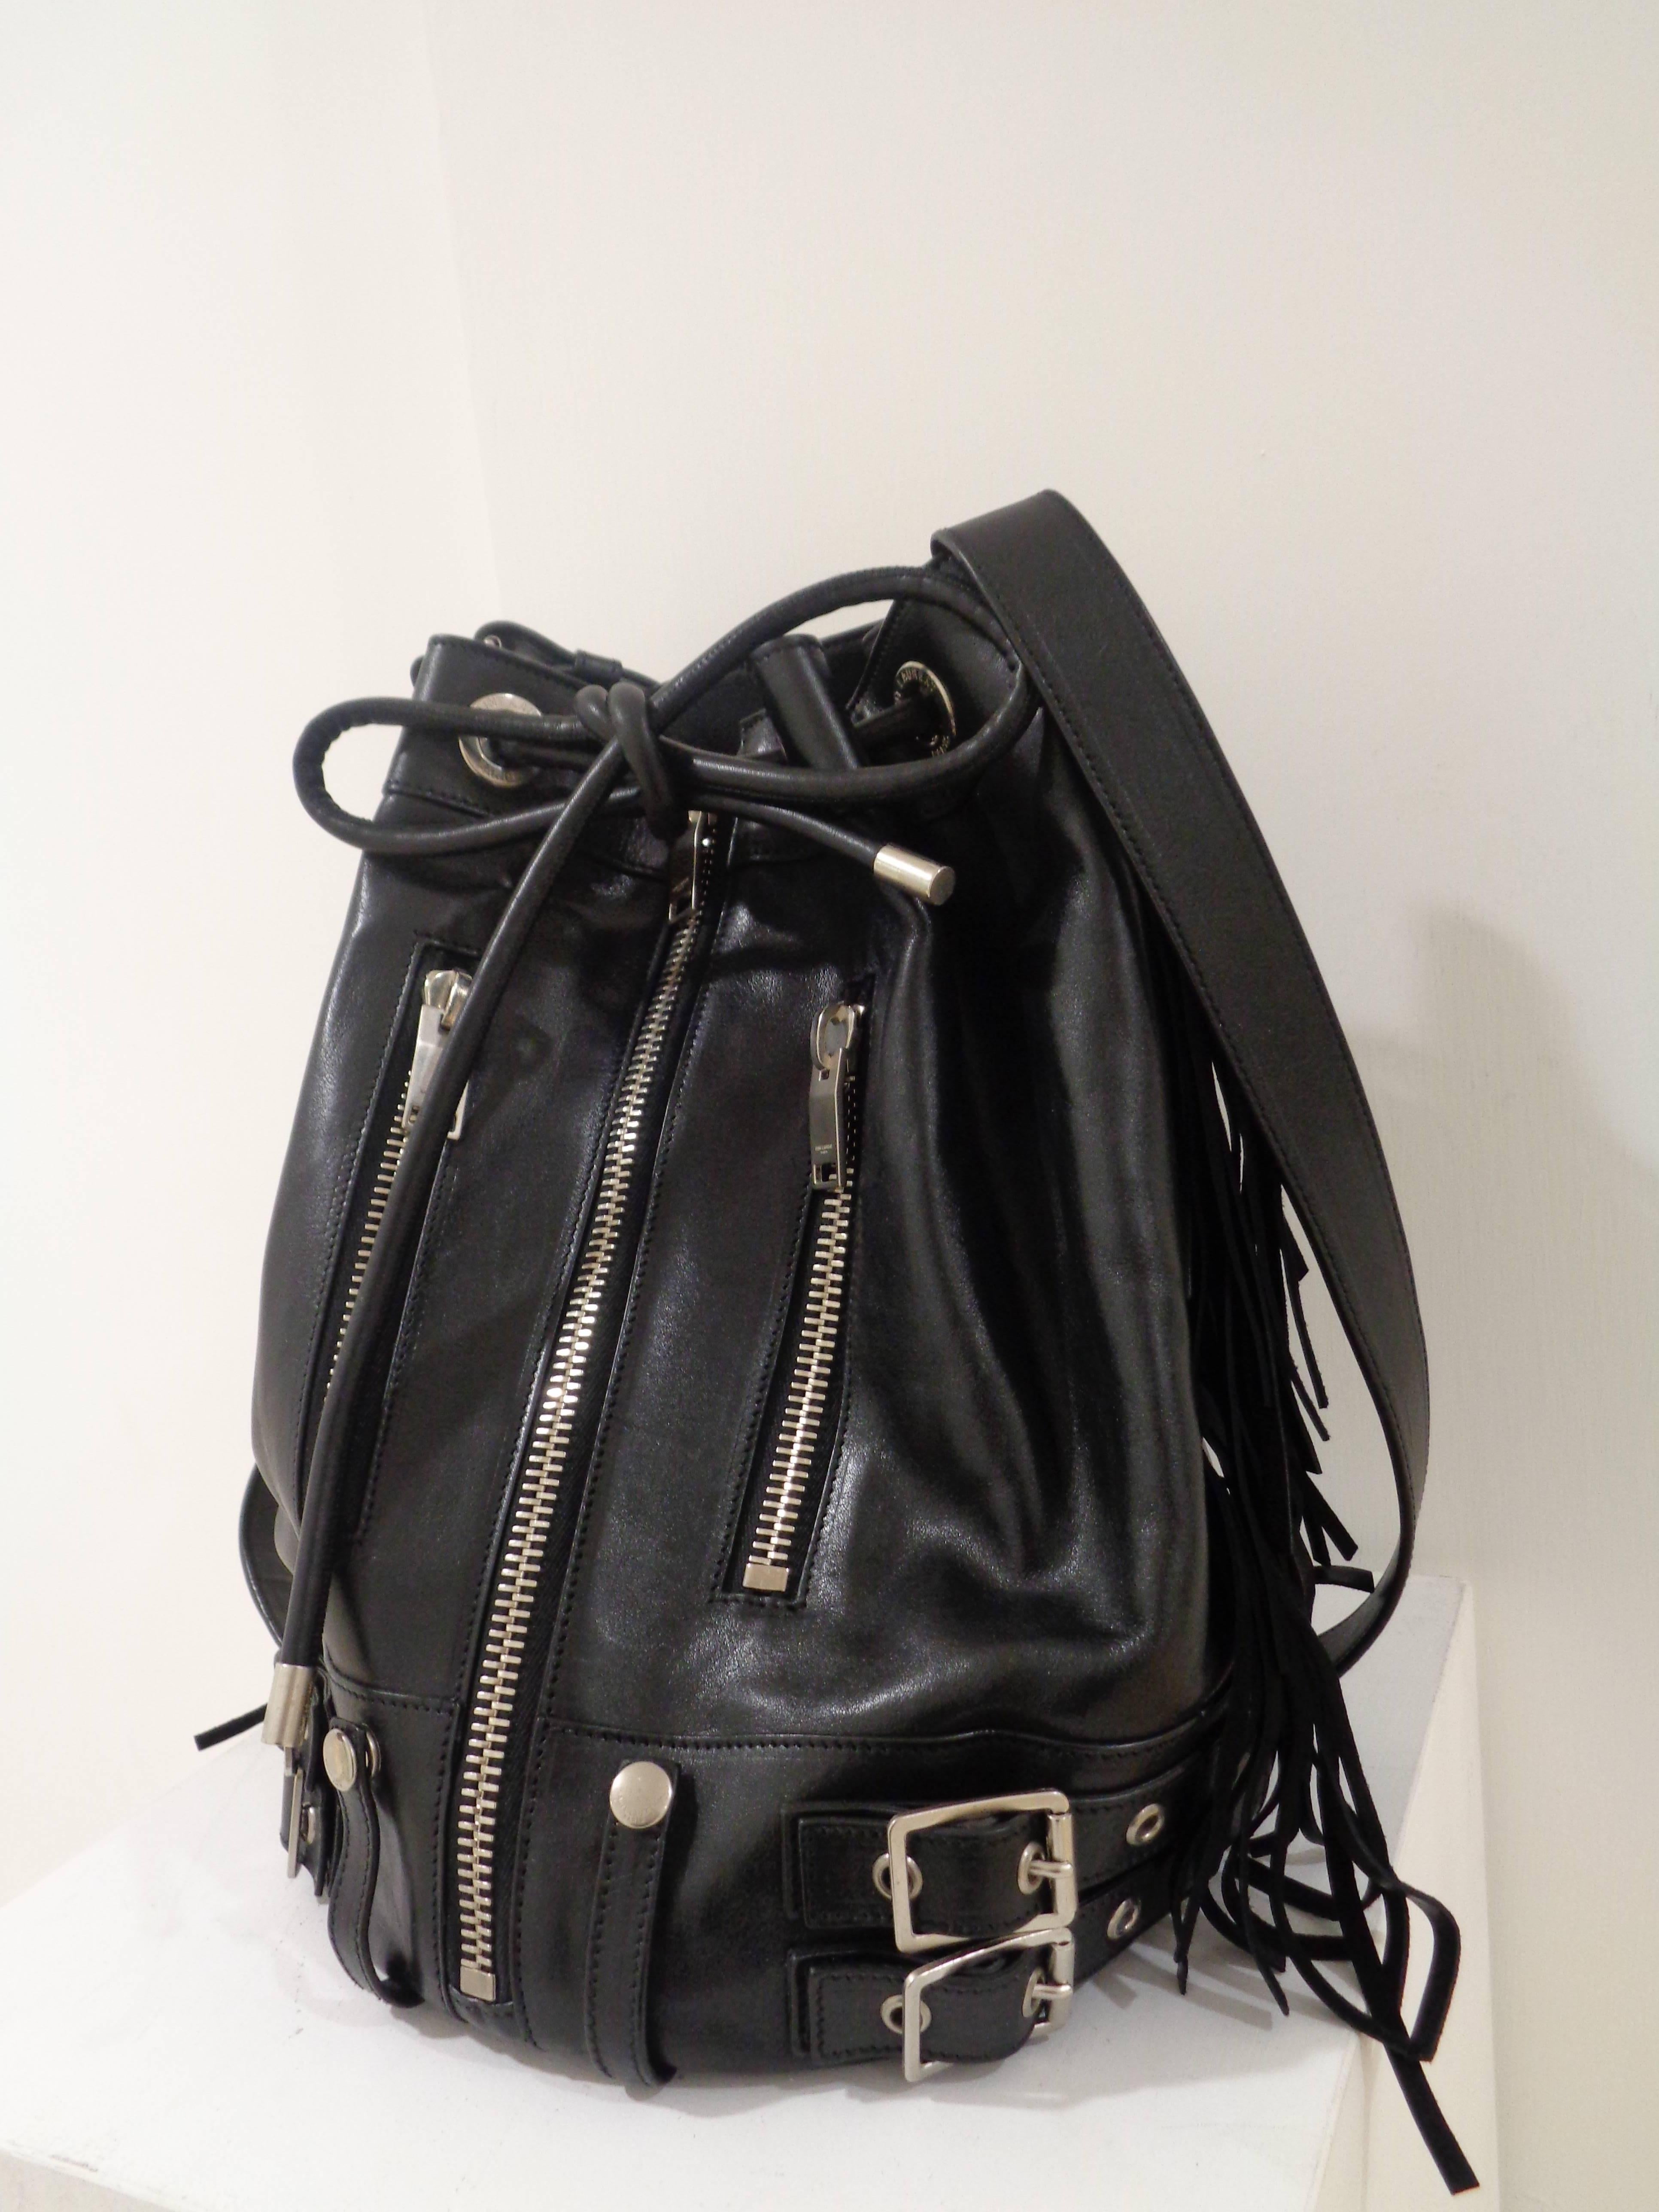 black satchel with silver hardware